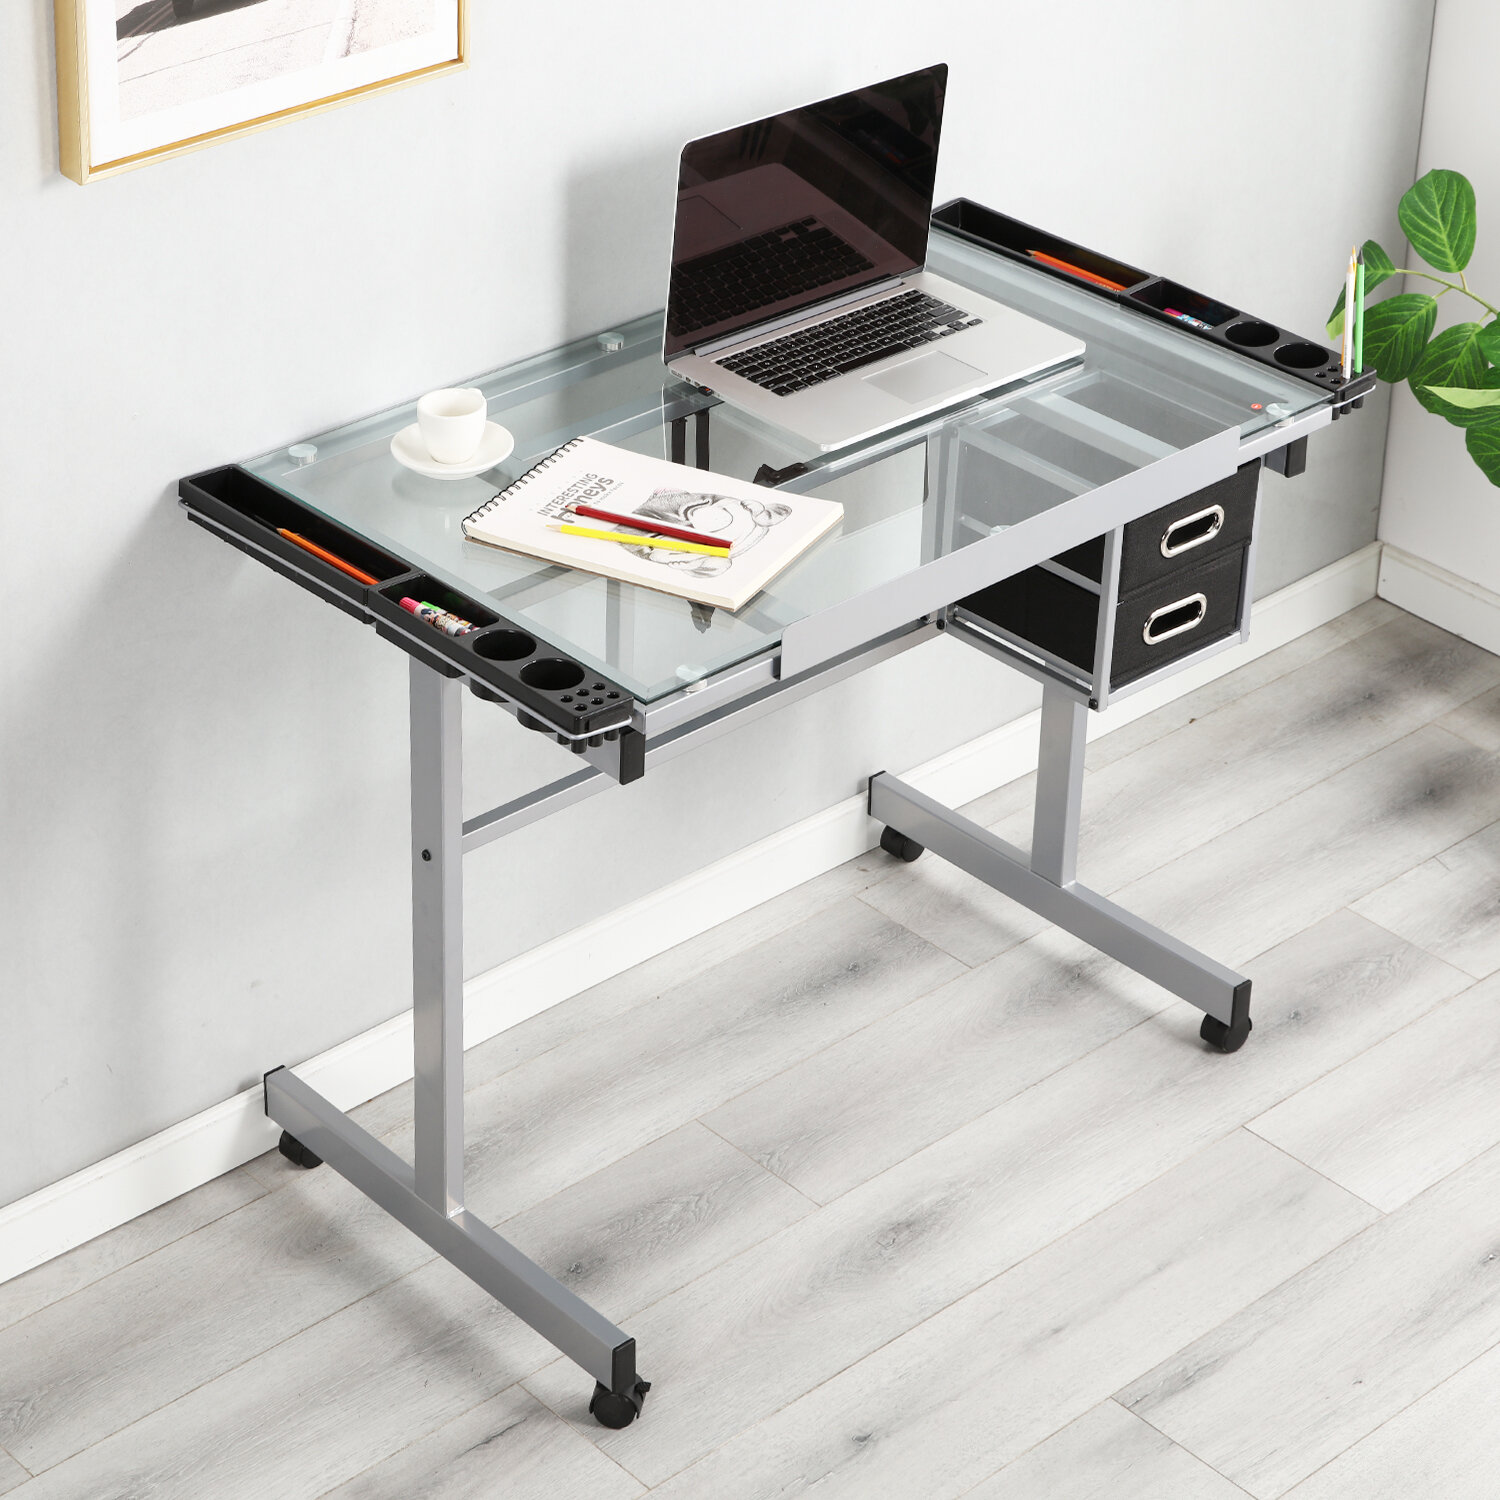 Adjustable Drawing and Drafting Table with Black Frame and Dual Wheel Casters - Flash Furniture